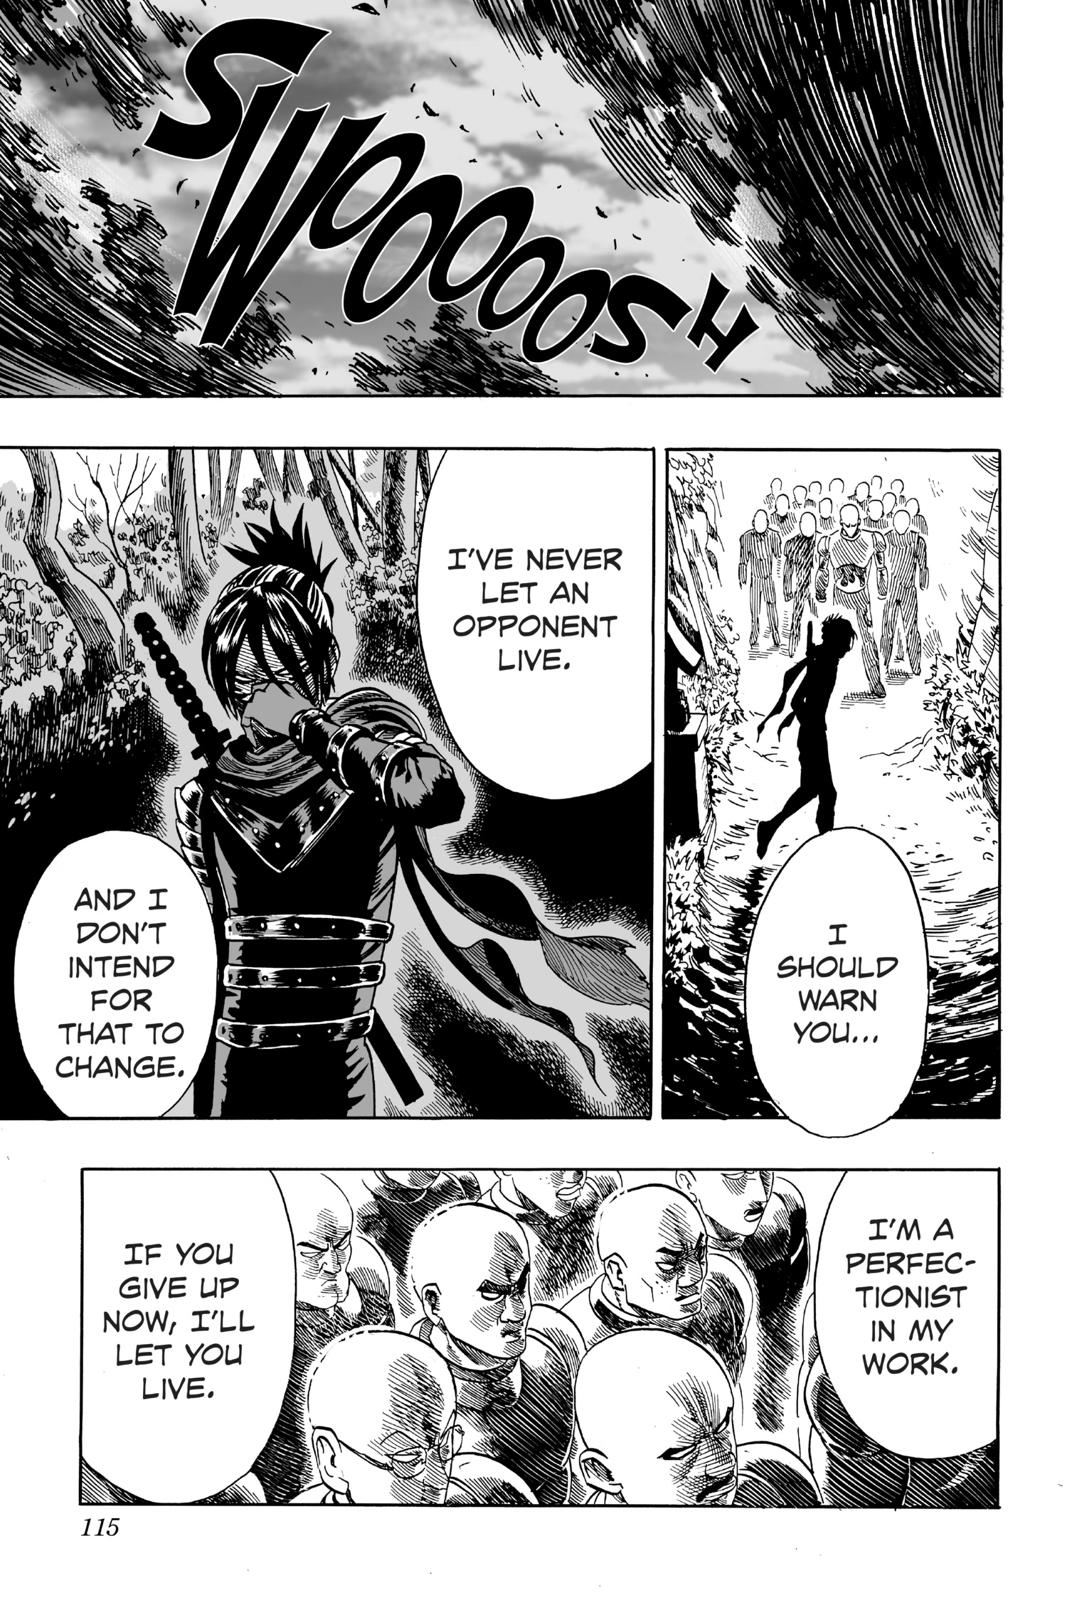 One-Punch Man, Punch 12 image 23